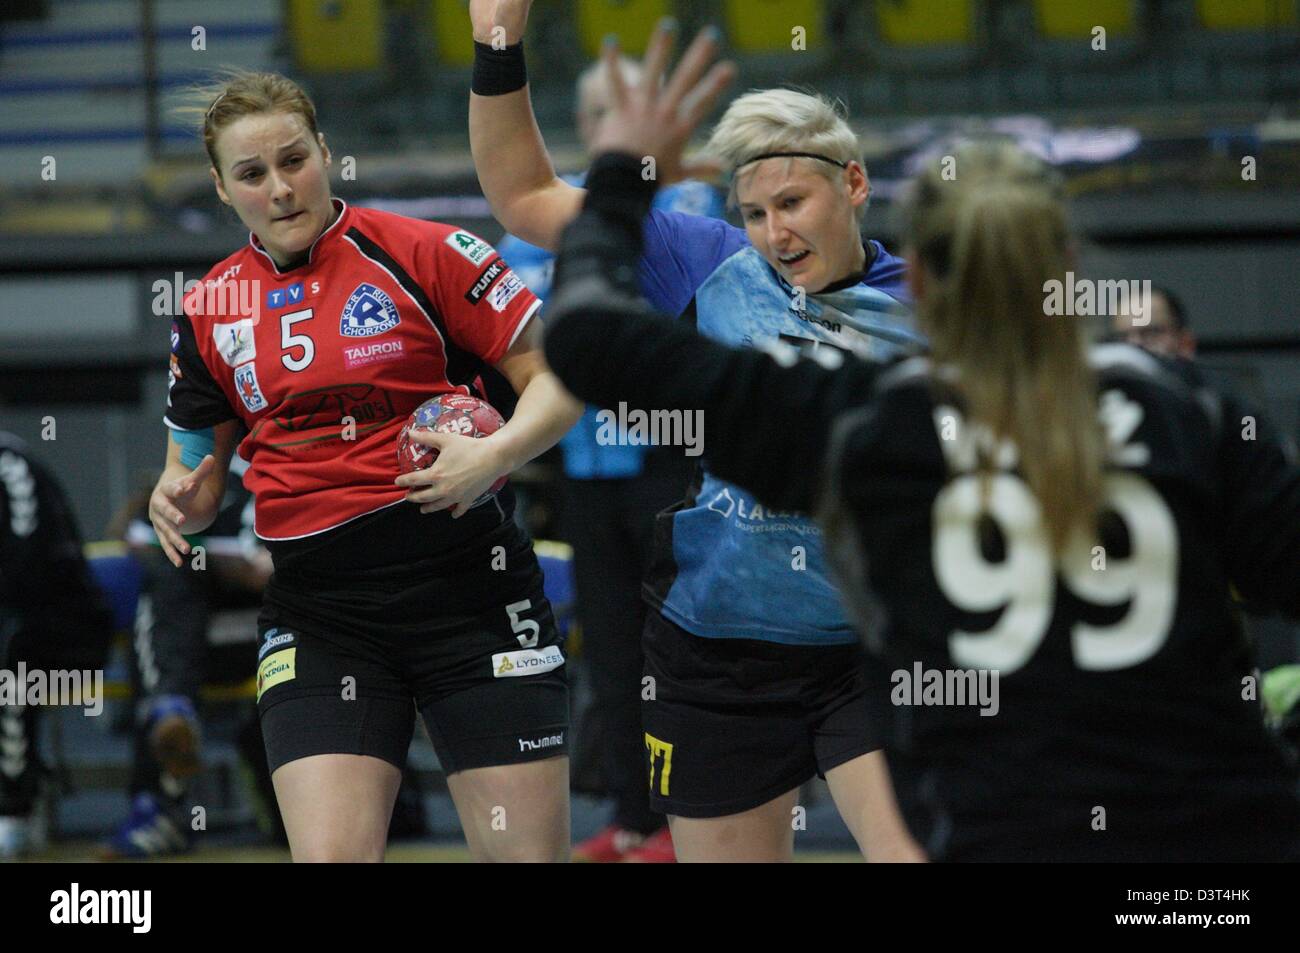 Poland 24th, February 2013 Handball: Final Four of the PGNiG Polish Cup. Vistal Laczpol Gdynia v KPR Ruch Chorzow game for 3th place in the Cup at HSW sports hall in Gdynia. Karolina Jasinowska(5) in action during the game Stock Photo